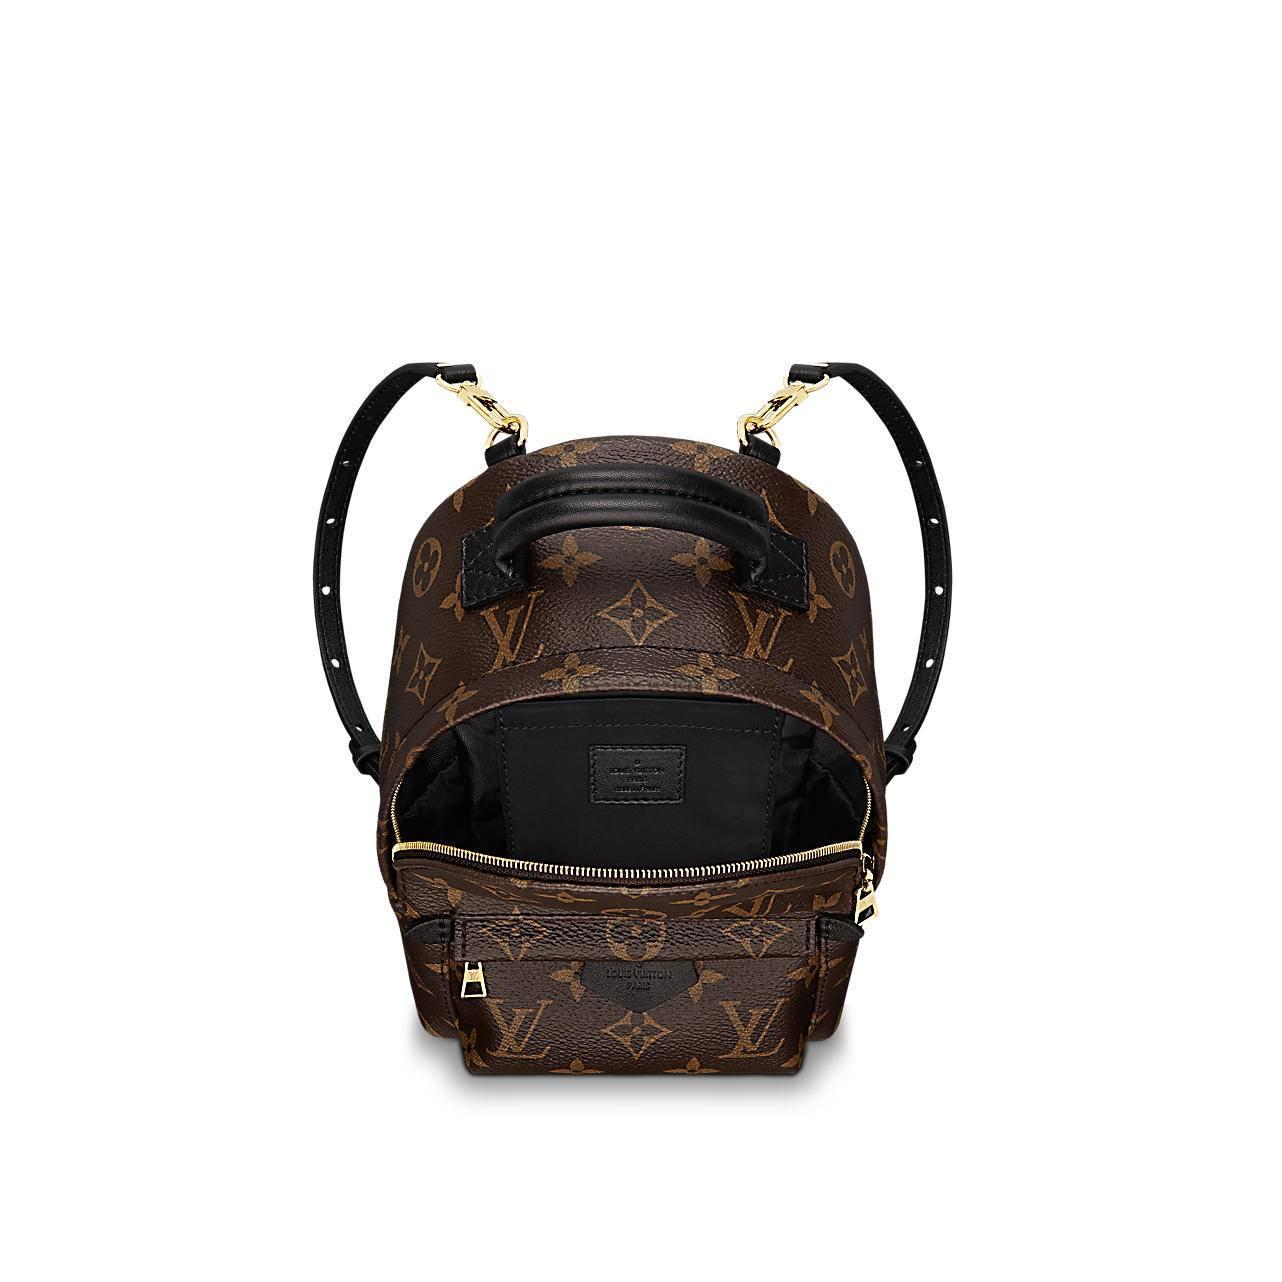 LV Louis Vuitton Palm Springs Backpack Mini SOLD OUT New at 1stdibs